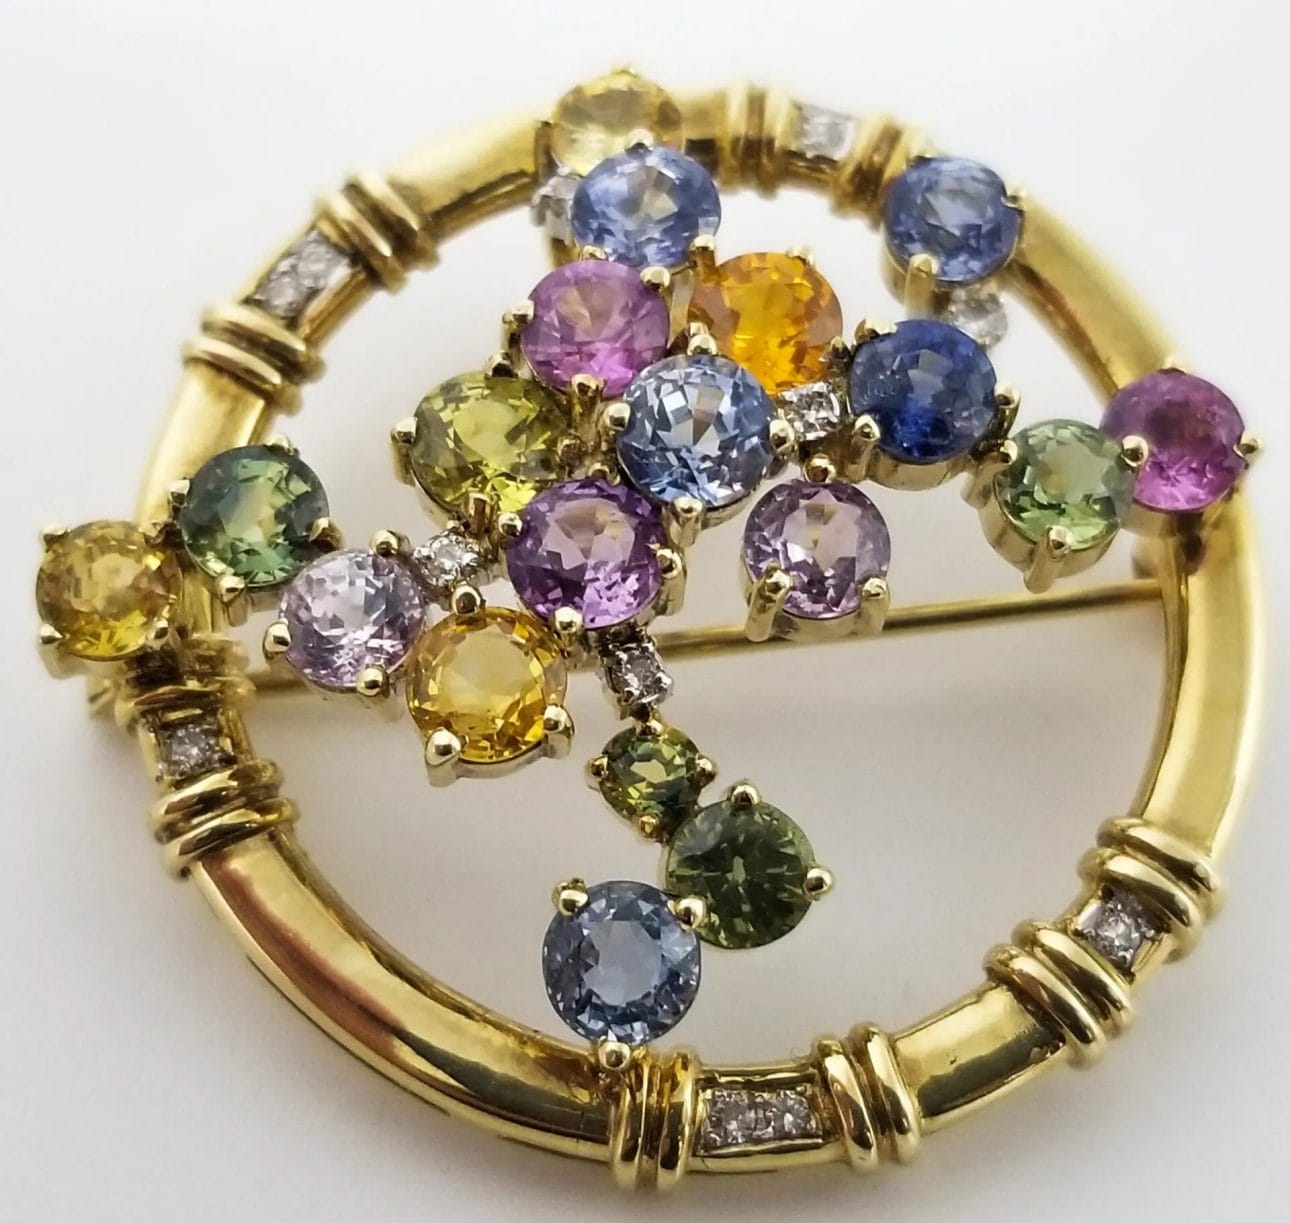 A yellow gold broochle with multi colored sapphires and diamonds.